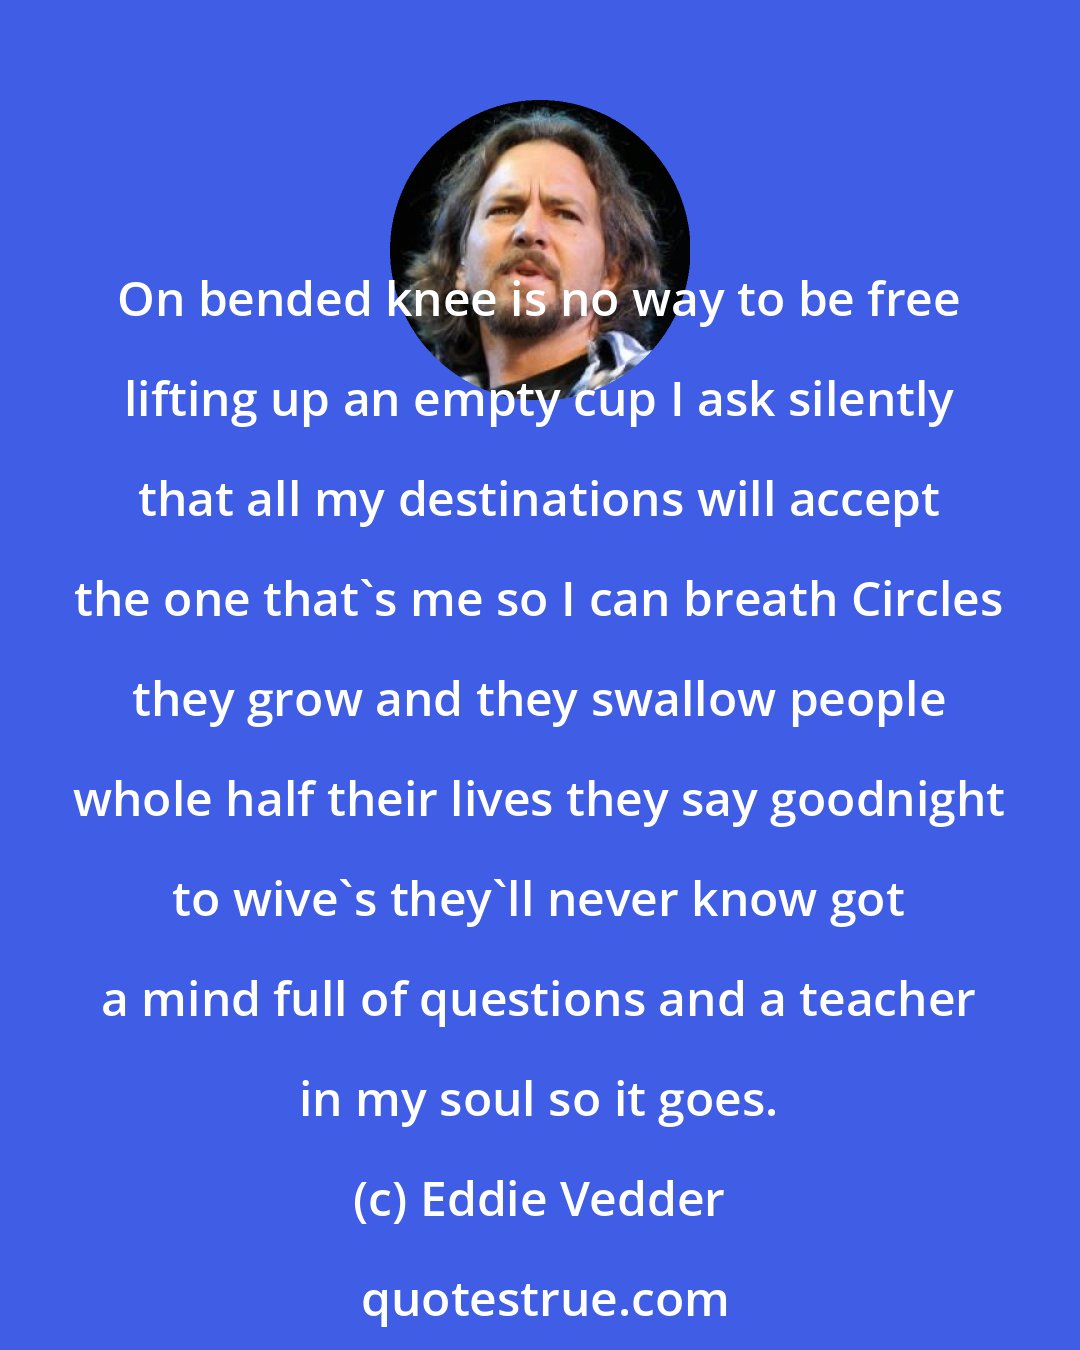 Eddie Vedder: On bended knee is no way to be free lifting up an empty cup I ask silently that all my destinations will accept the one that's me so I can breath Circles they grow and they swallow people whole half their lives they say goodnight to wive's they'll never know got a mind full of questions and a teacher in my soul so it goes.